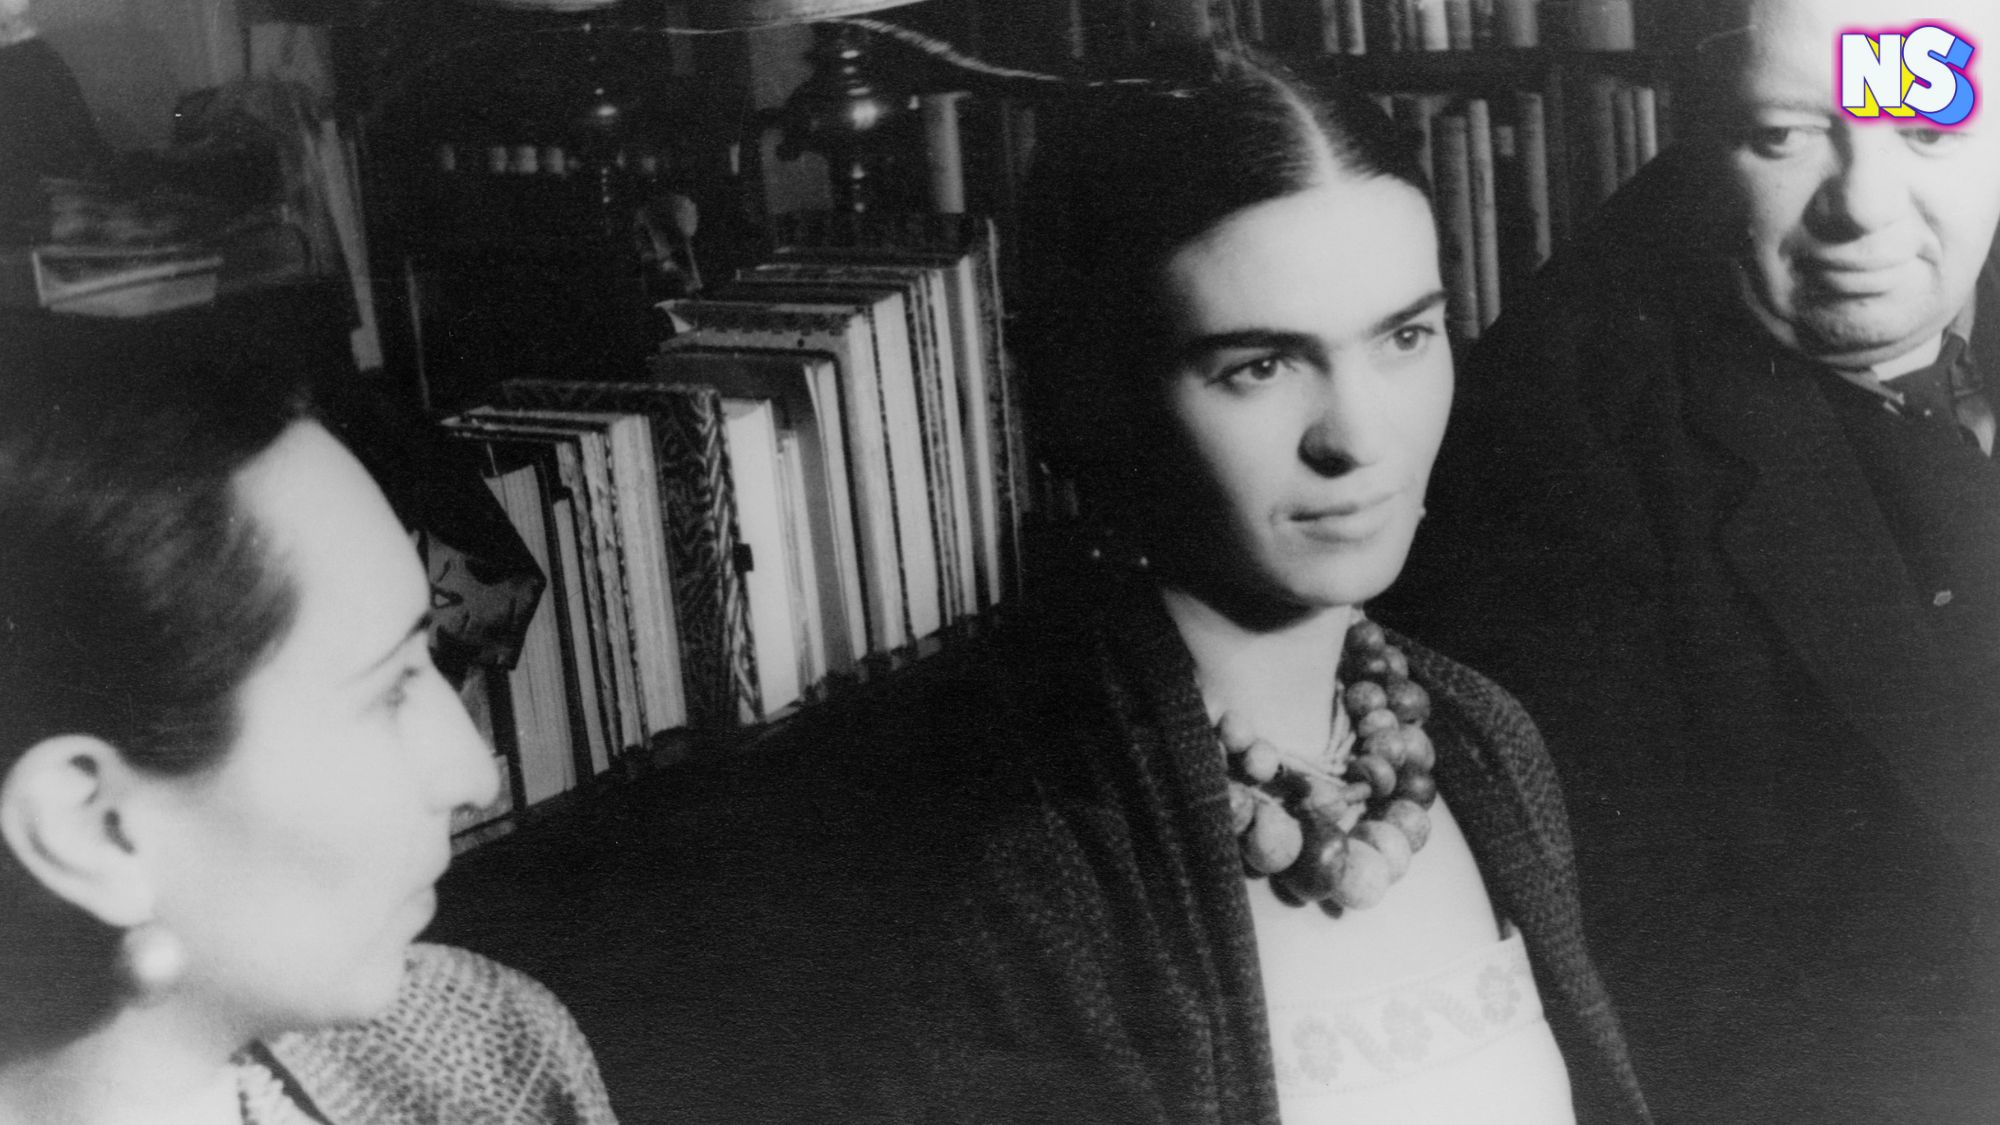 Photograph of Frida Kahlo in 1932.